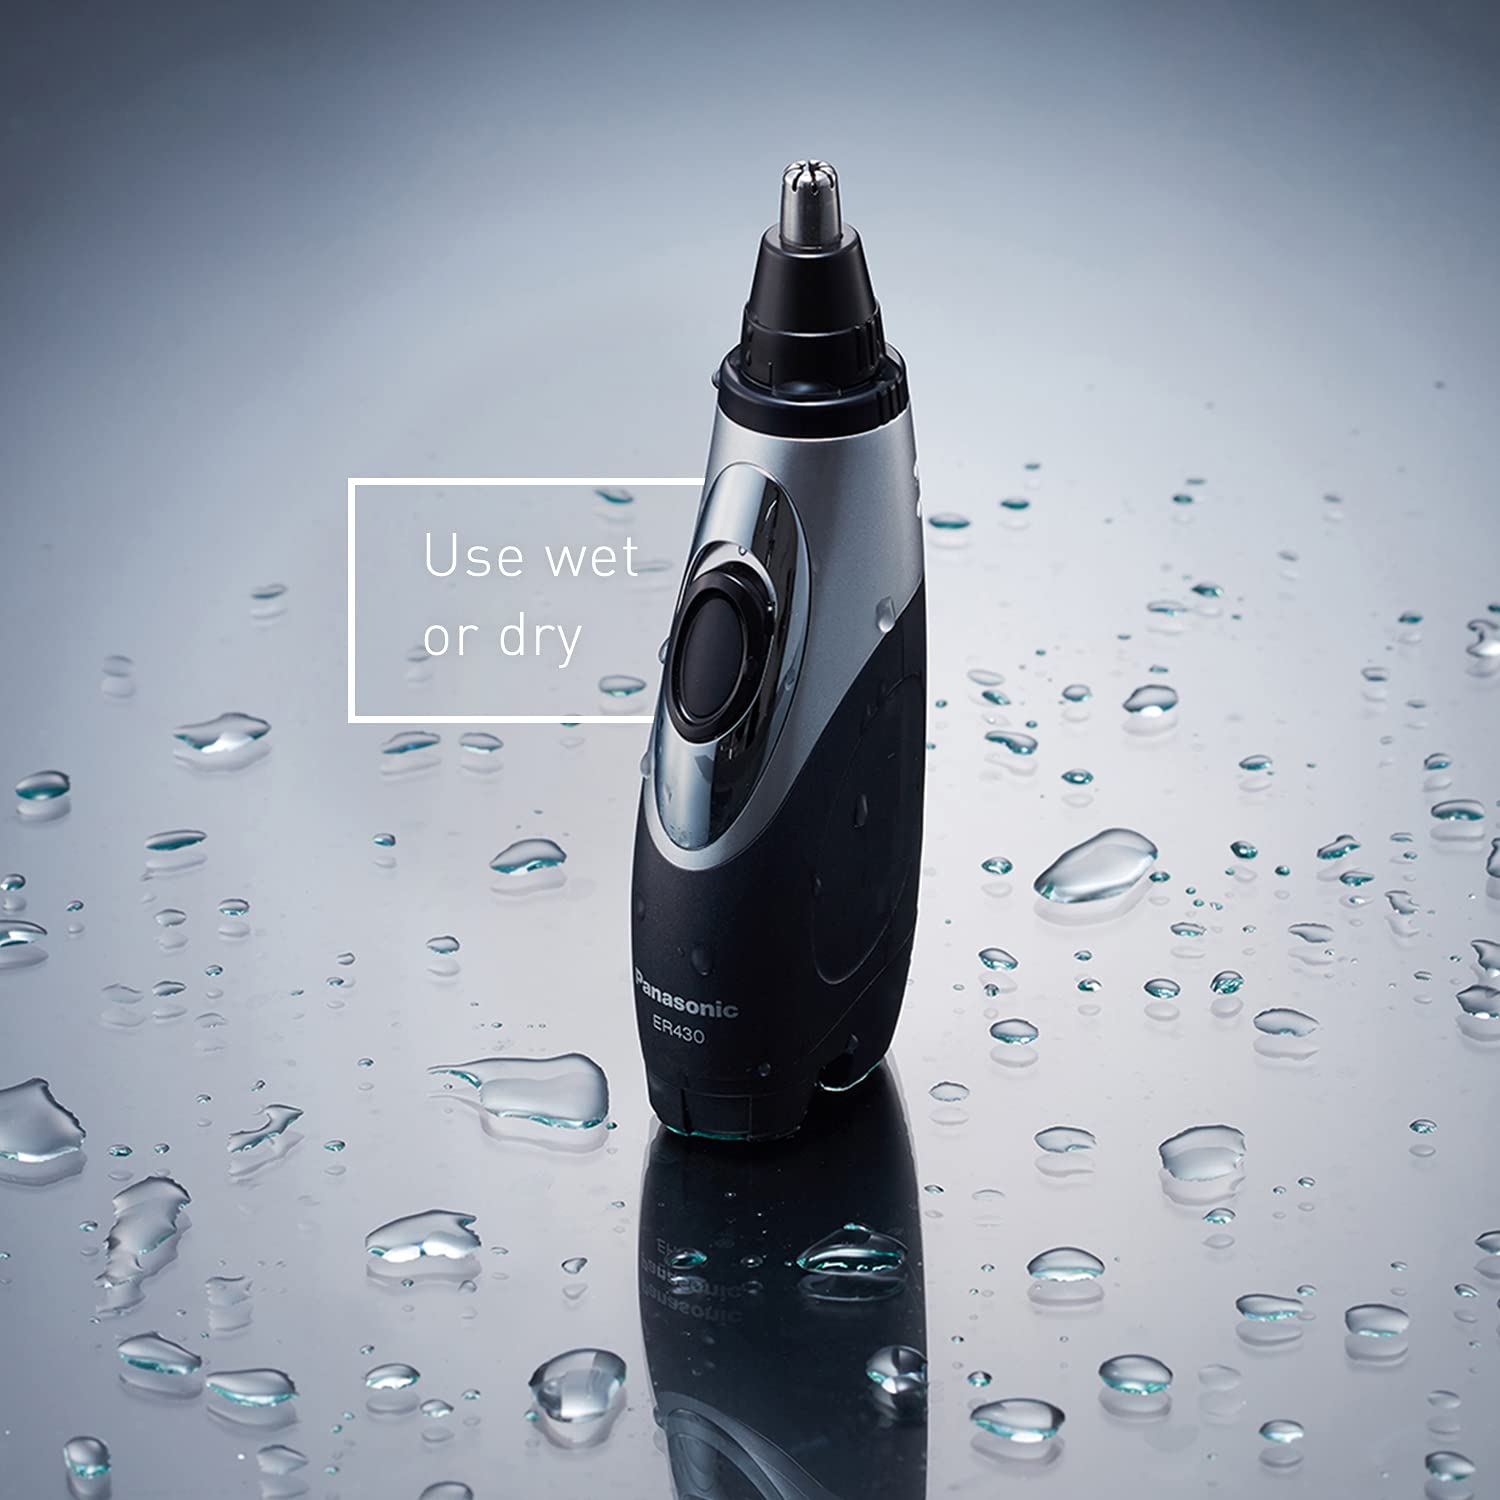 Study of Panasonic ER430K Nose, Ear and Facial Hair Trimmer Wet/Dry with Vacuum Cleaning System